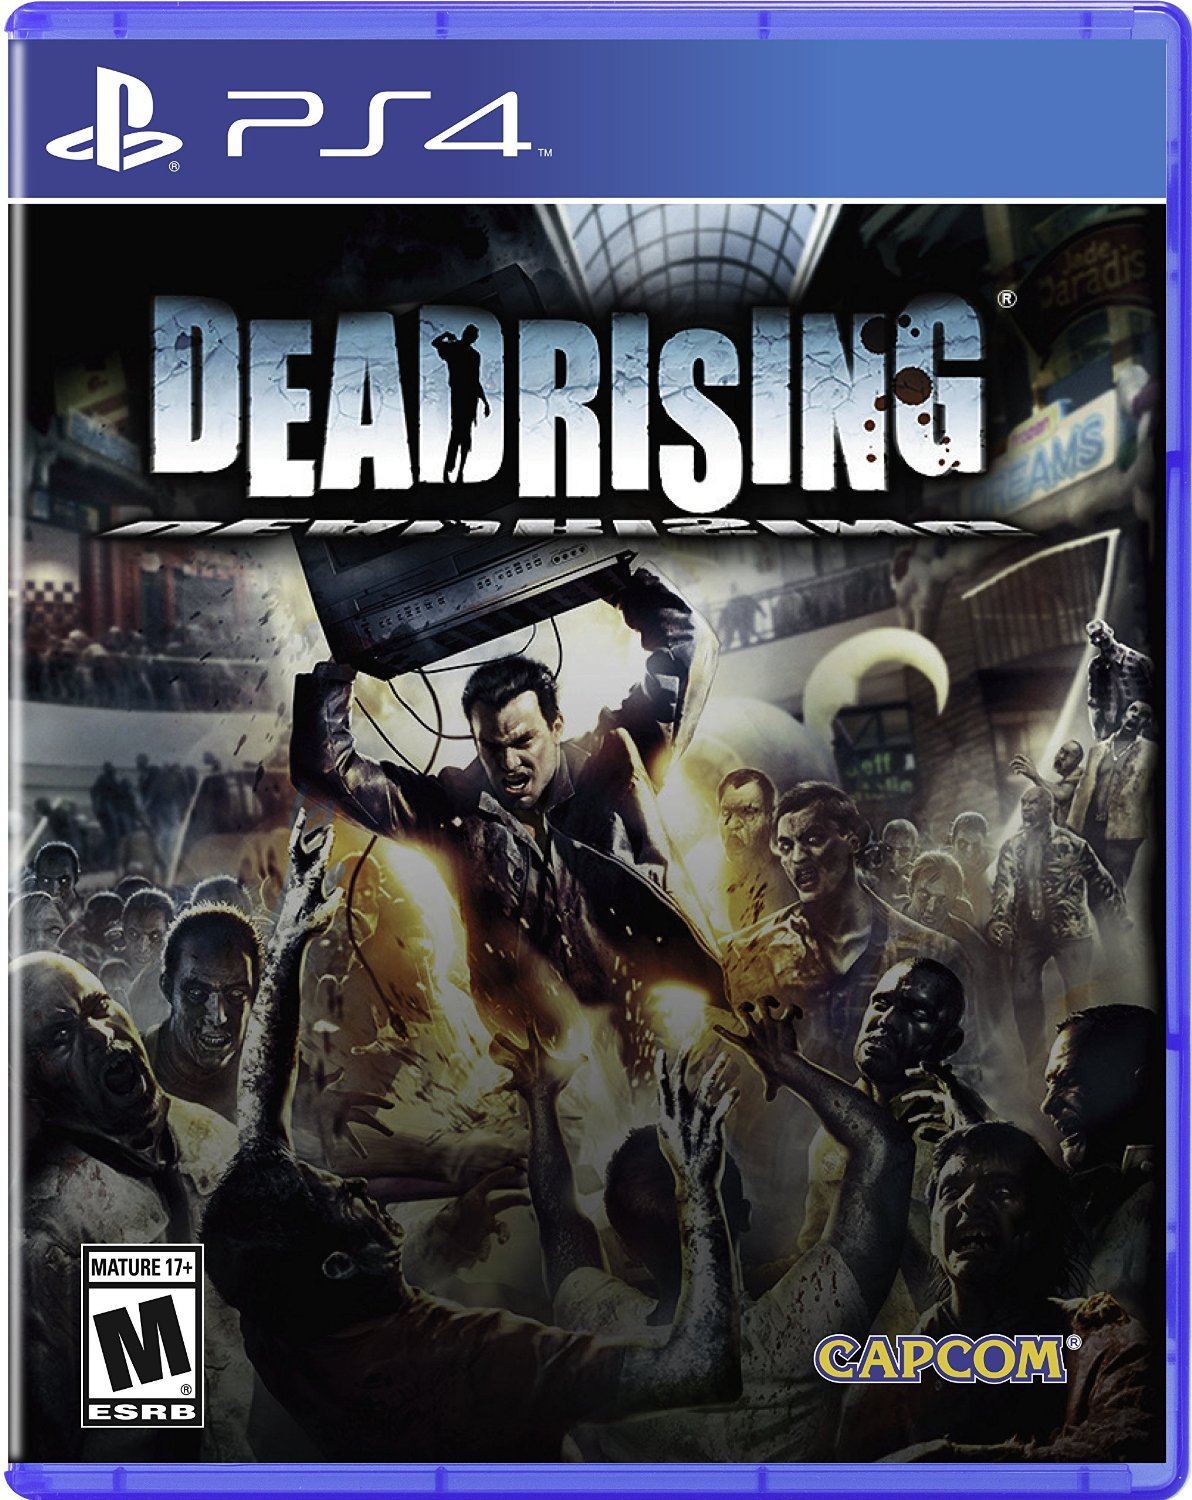 Dead Rising 4: Frank's Big Package (PlayStation 4, 2017) for sale